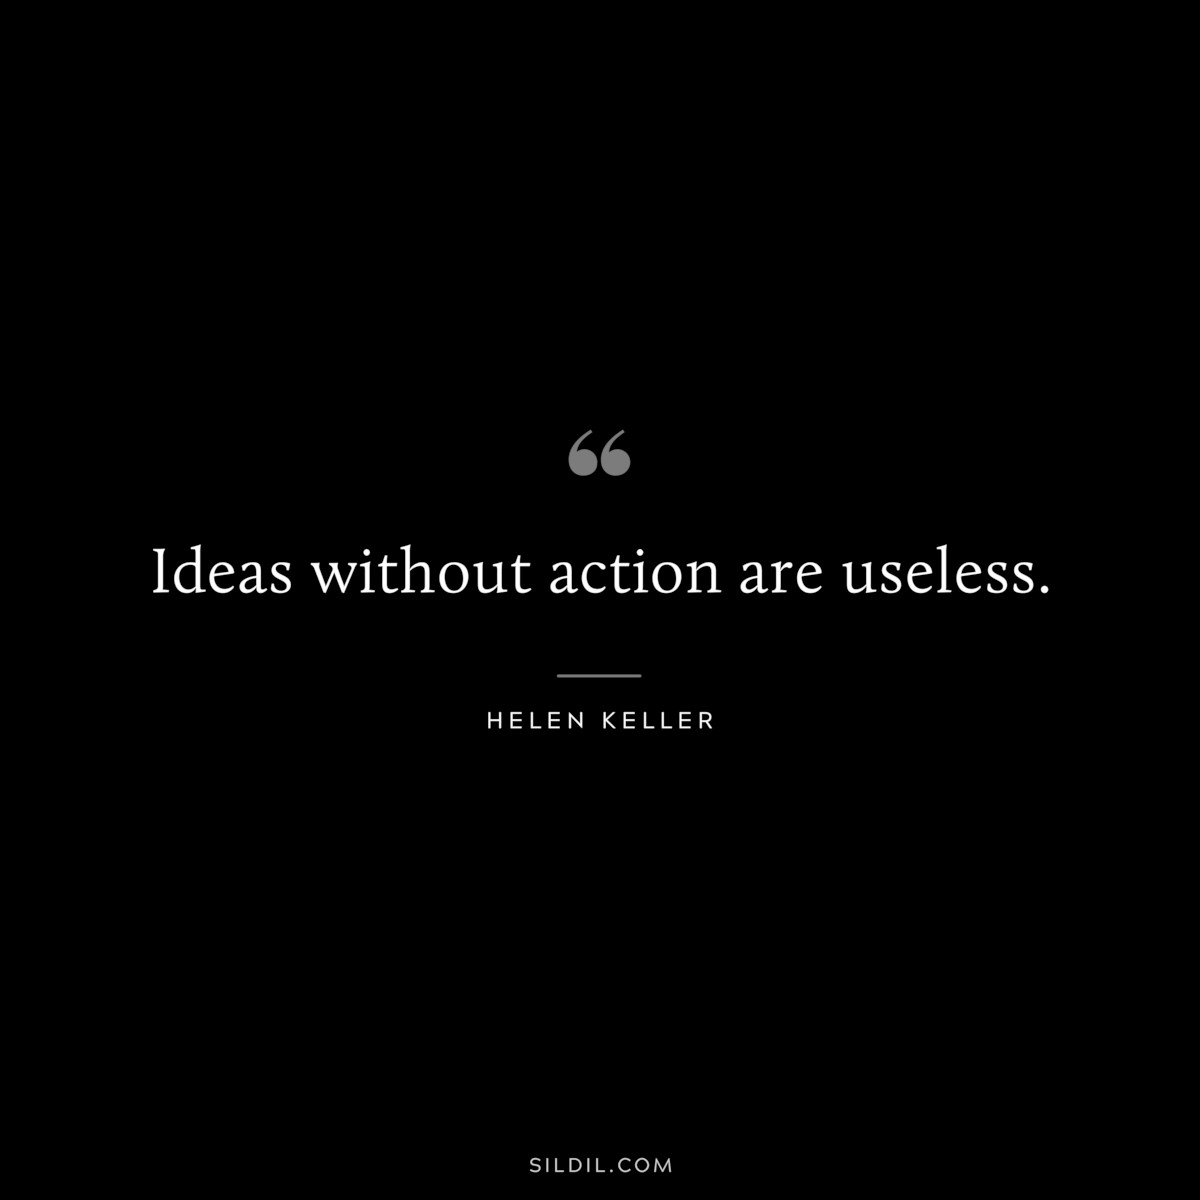 Ideas without action are useless. ― Helen Keller